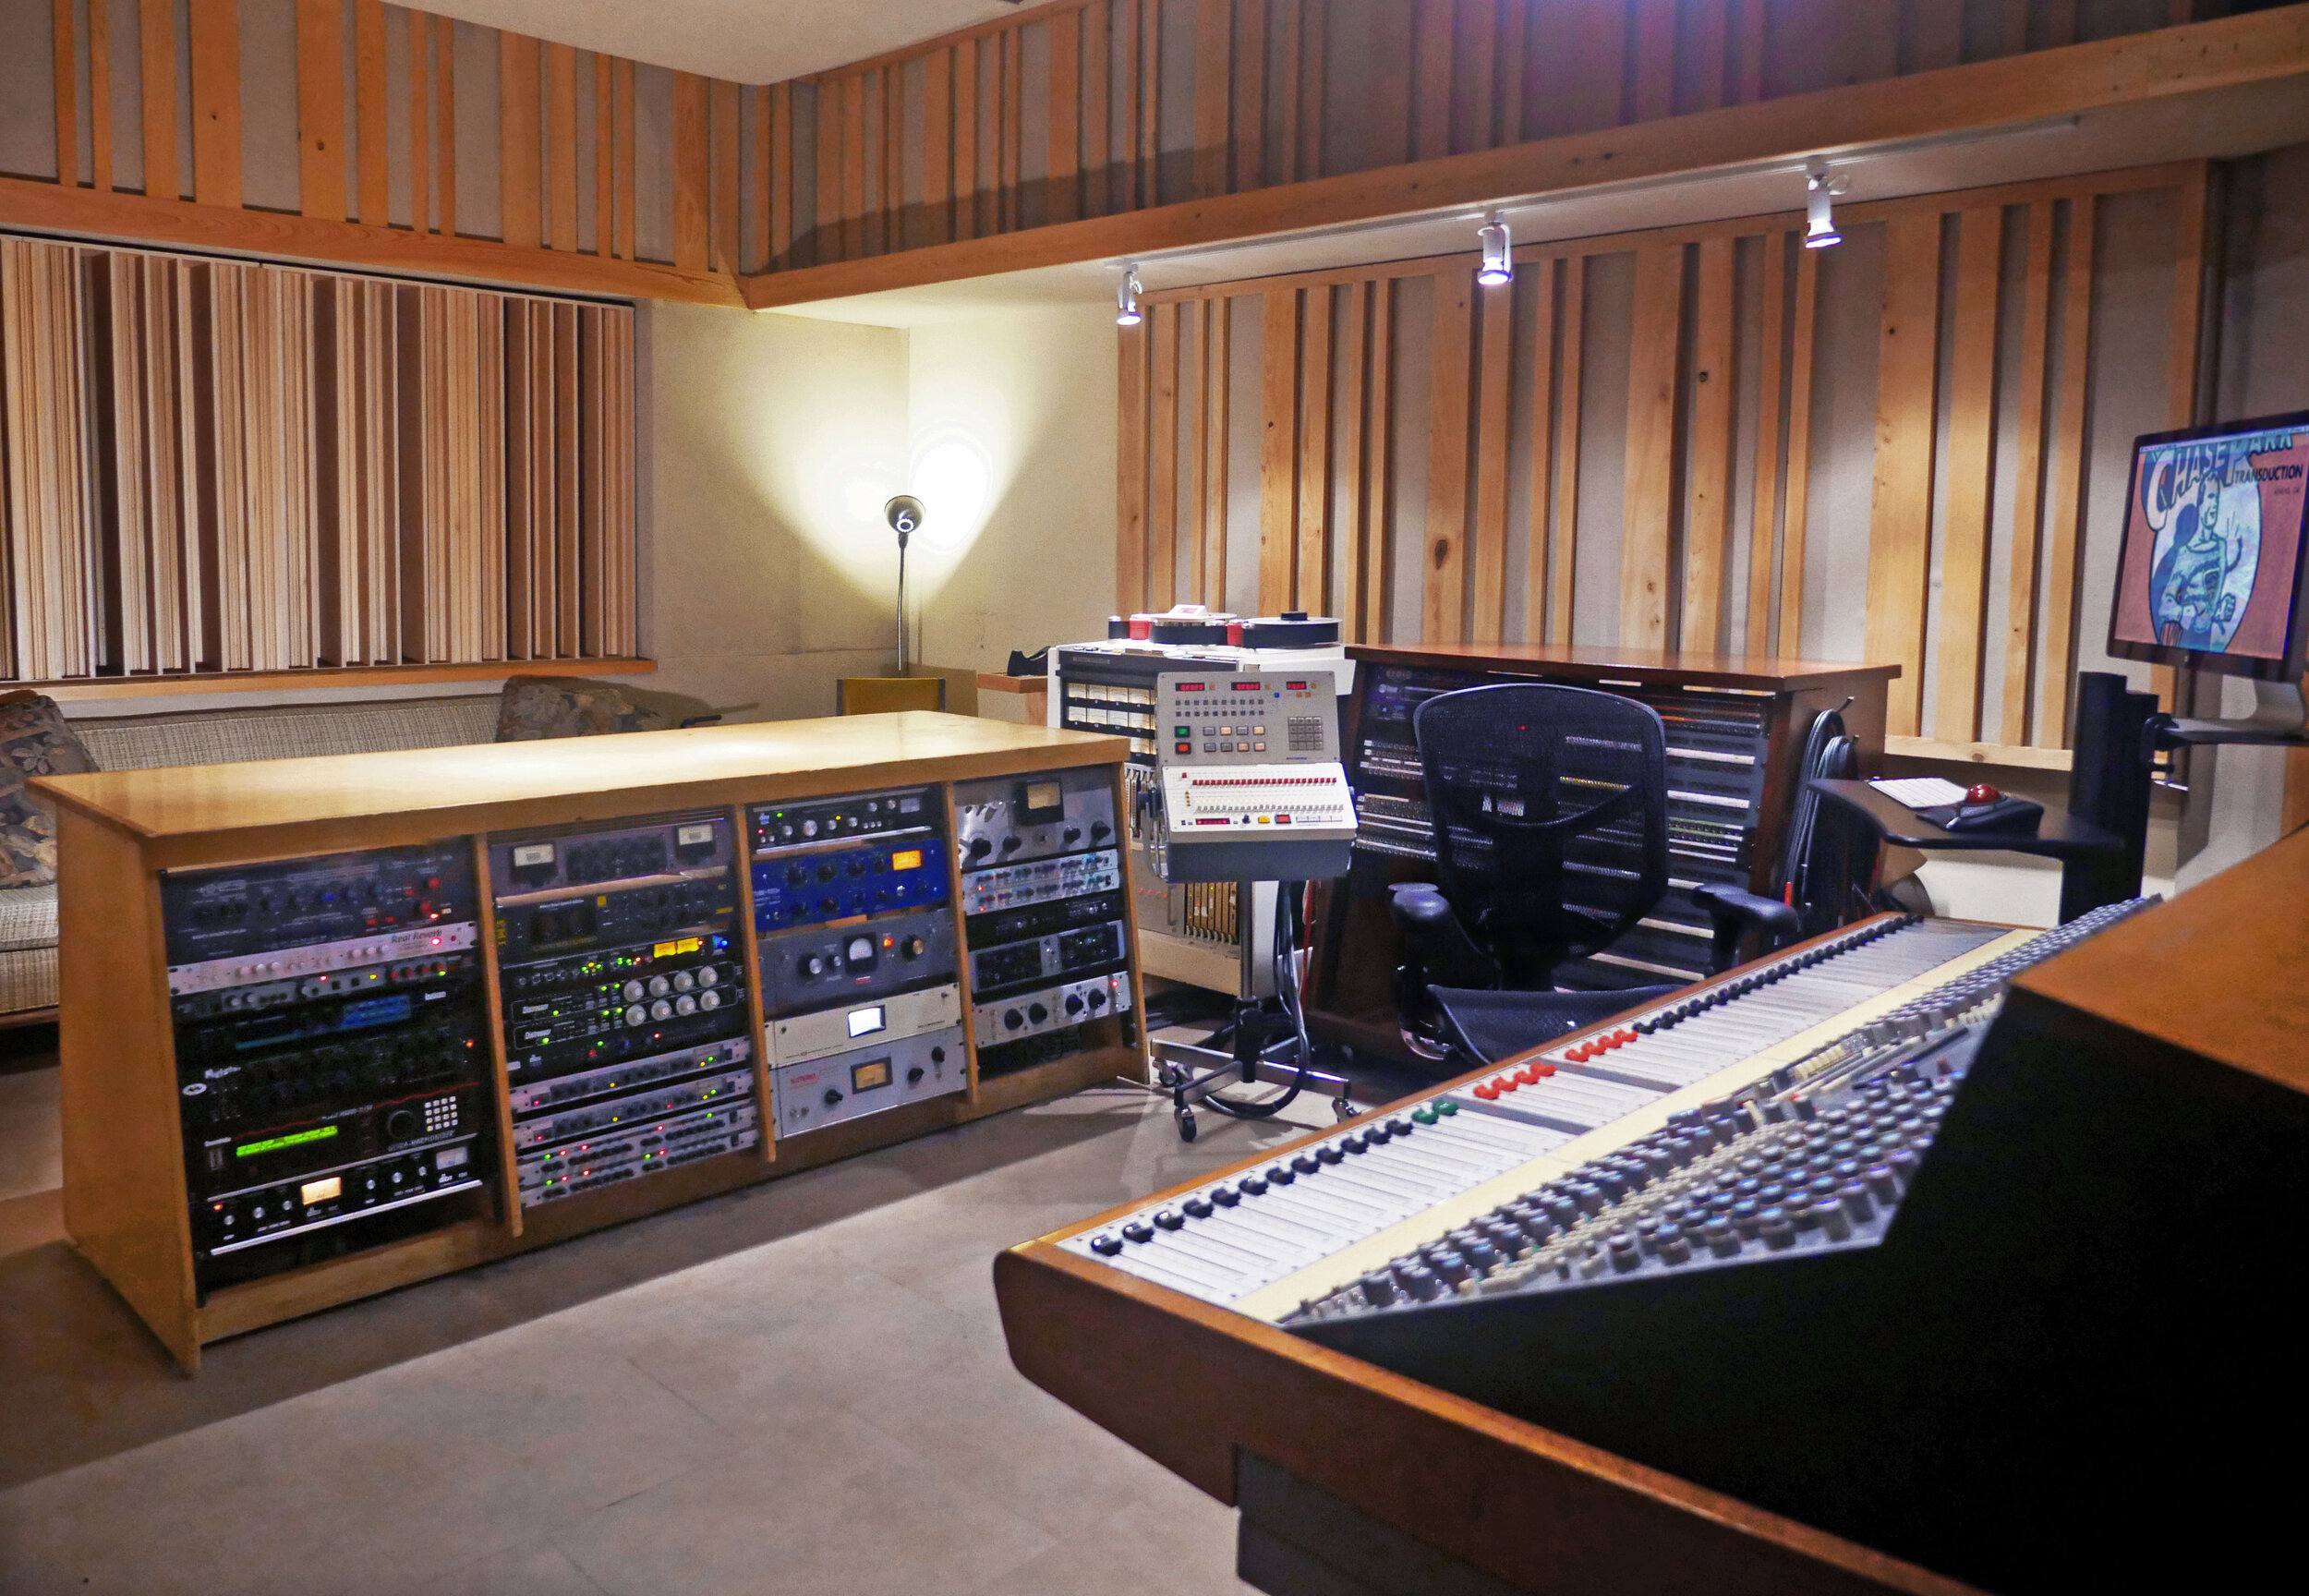 CPT_A-Control-Room_New-Console-2_FINAL.2.jpg